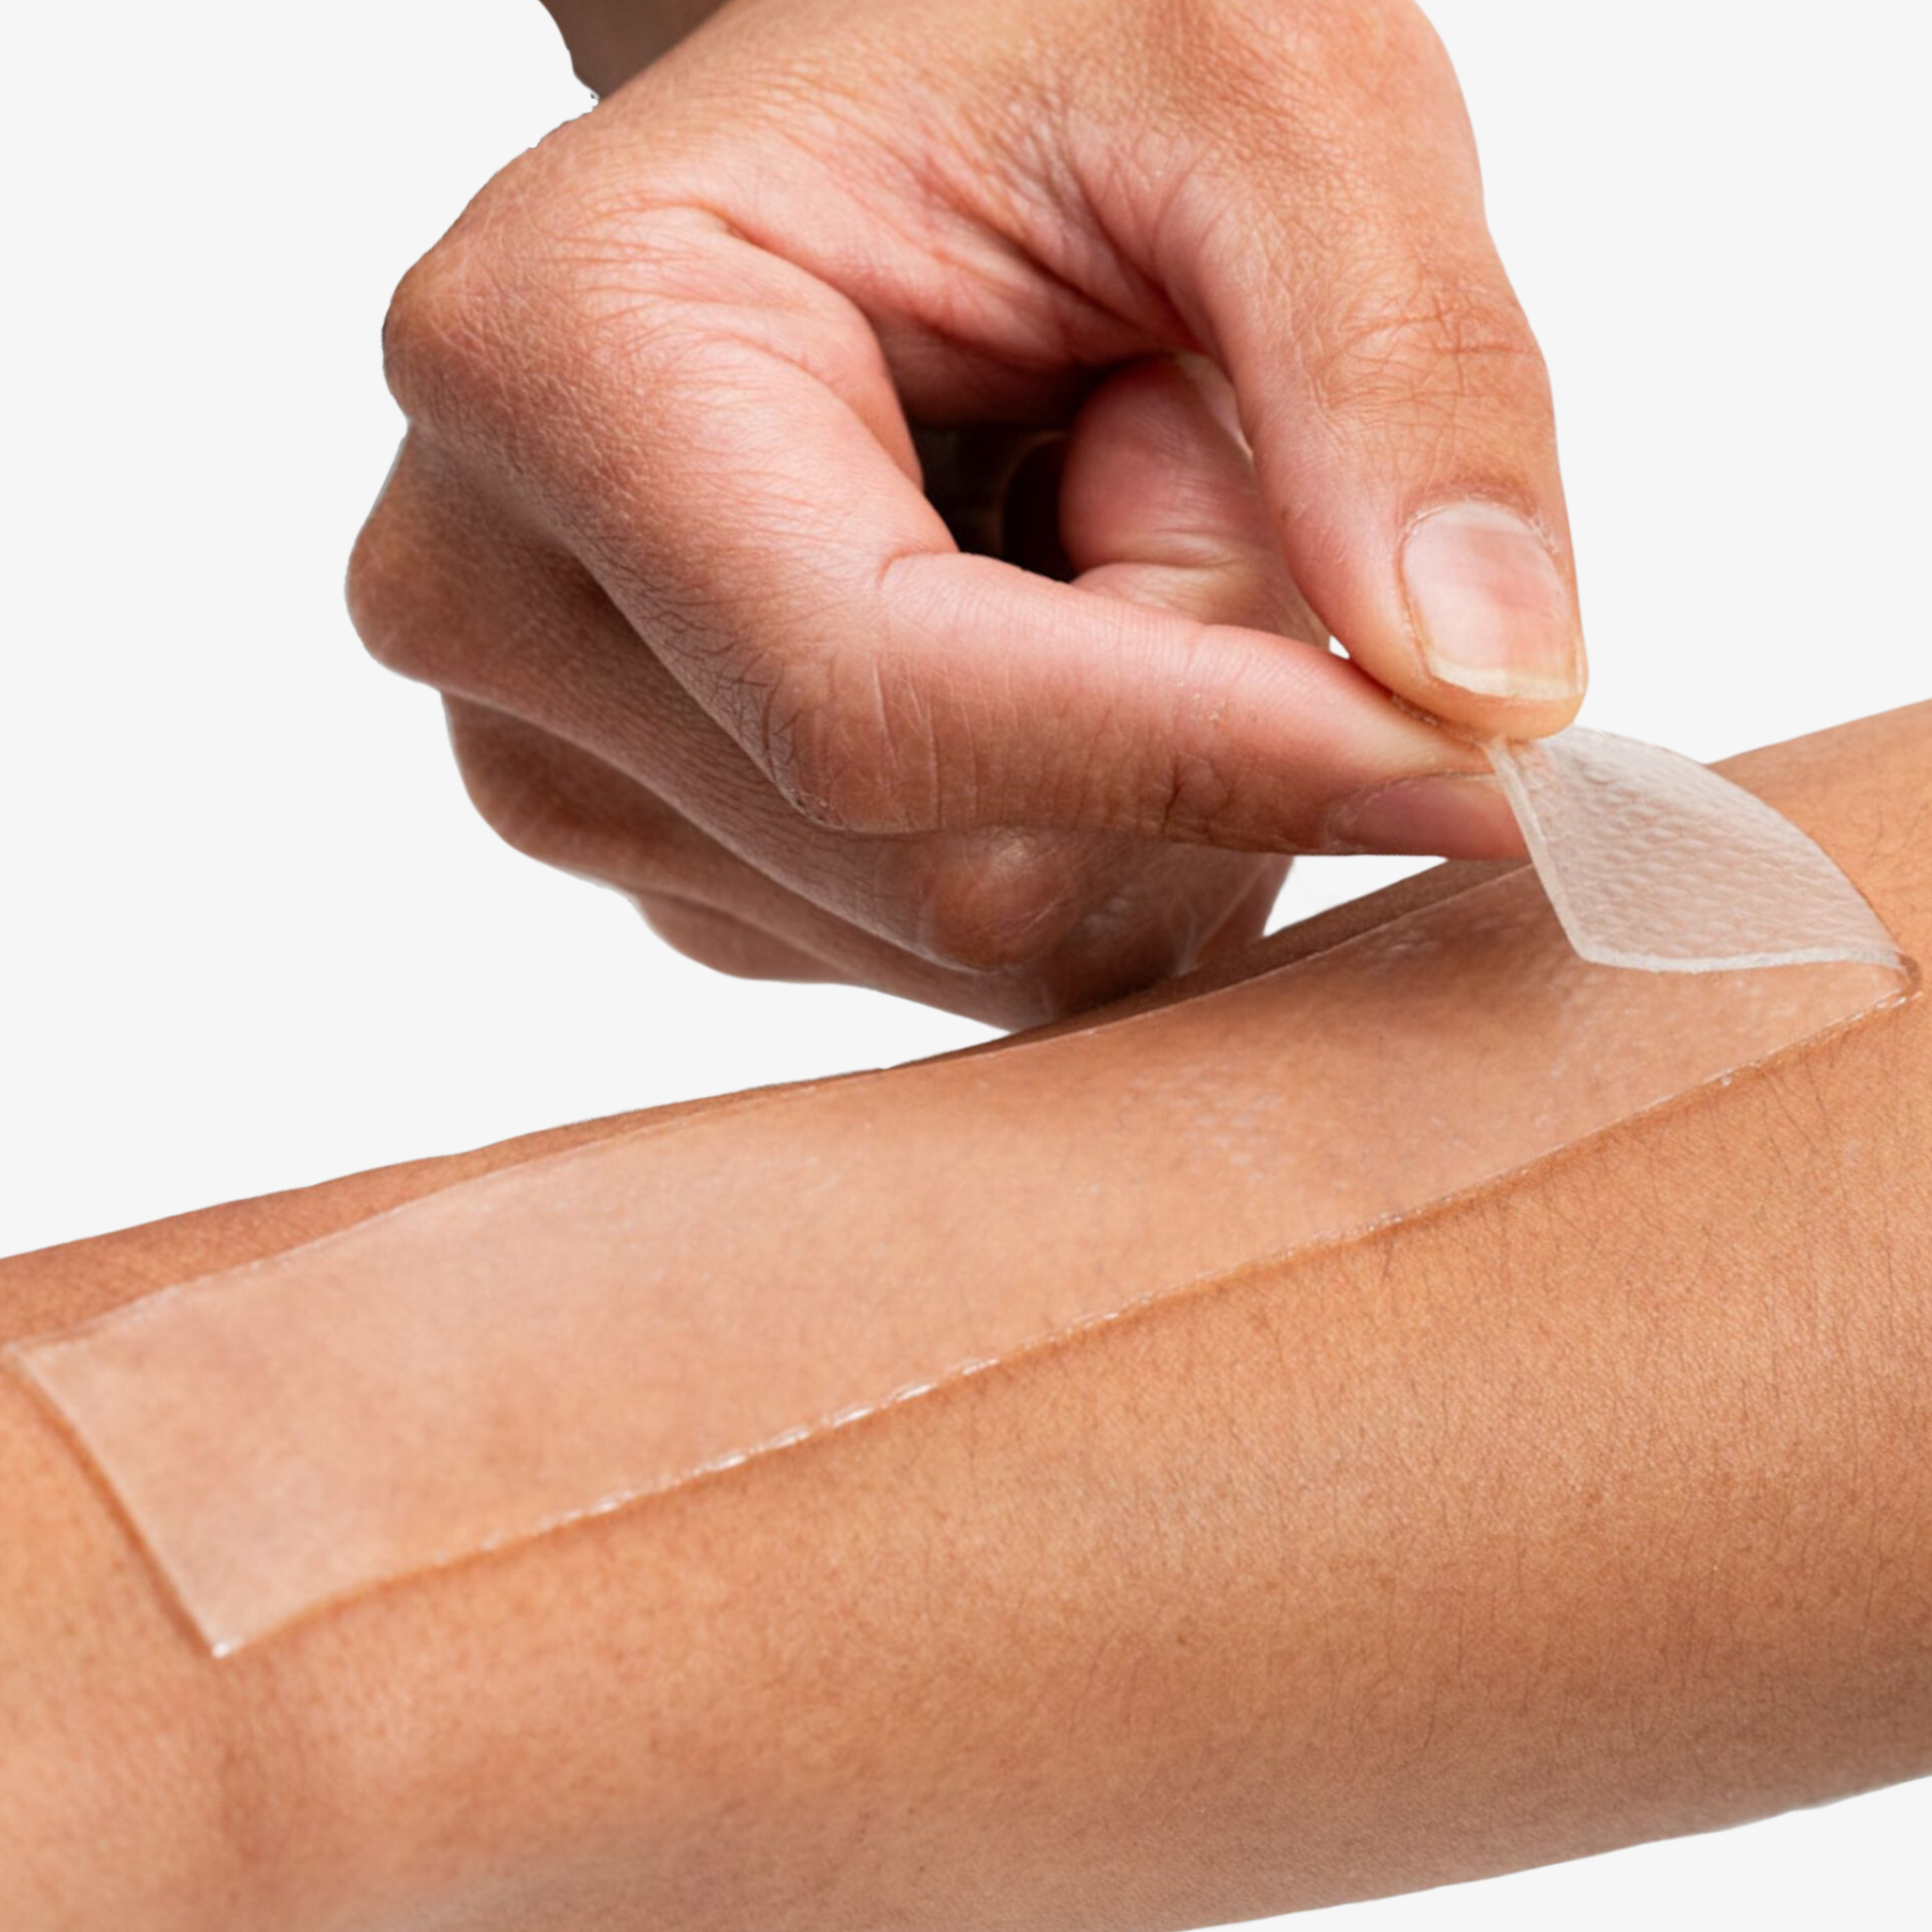 Advanced Medical-Grade Silicone Sheet Areola 1" x 6" strips on caucasian women's arm | clear